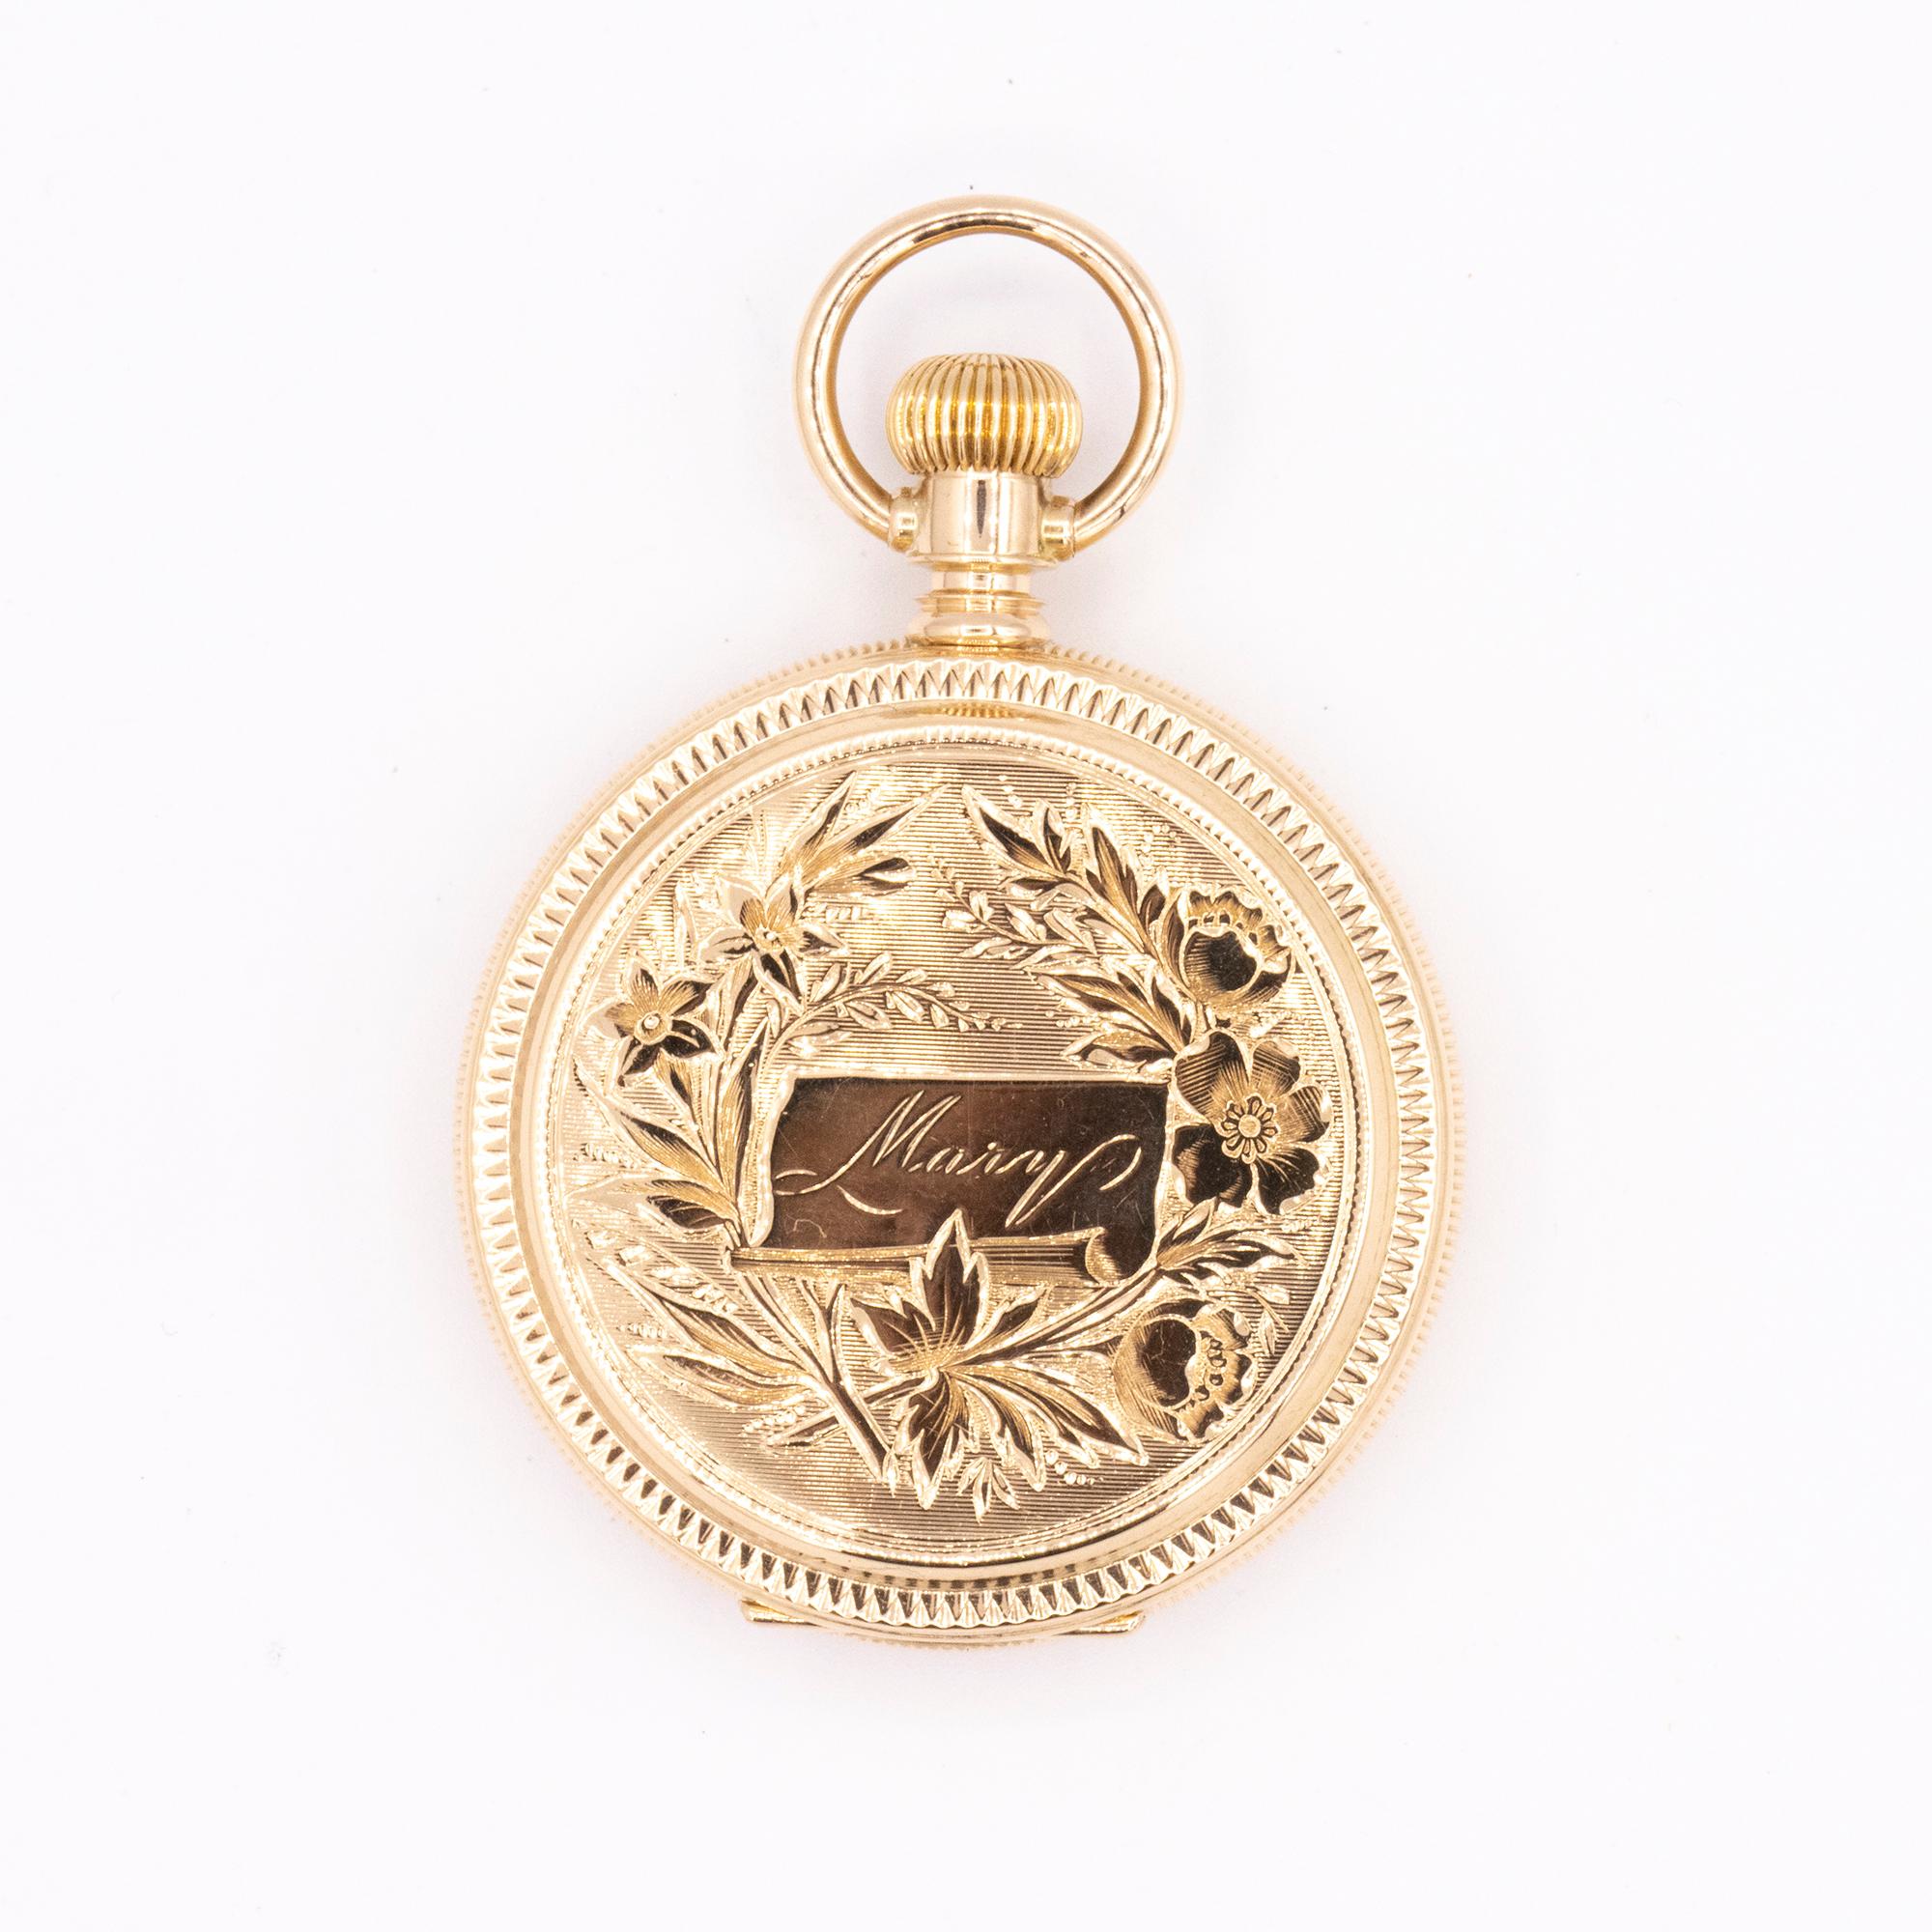 Vintage 14kt Yellow Gold engraved Waltham pocket watch. White dial with sub-seconds dial. Case # 10414. Circa 1886. Size 6 (Aprx. 34mm).

Expertly restored by our master watchmakers.